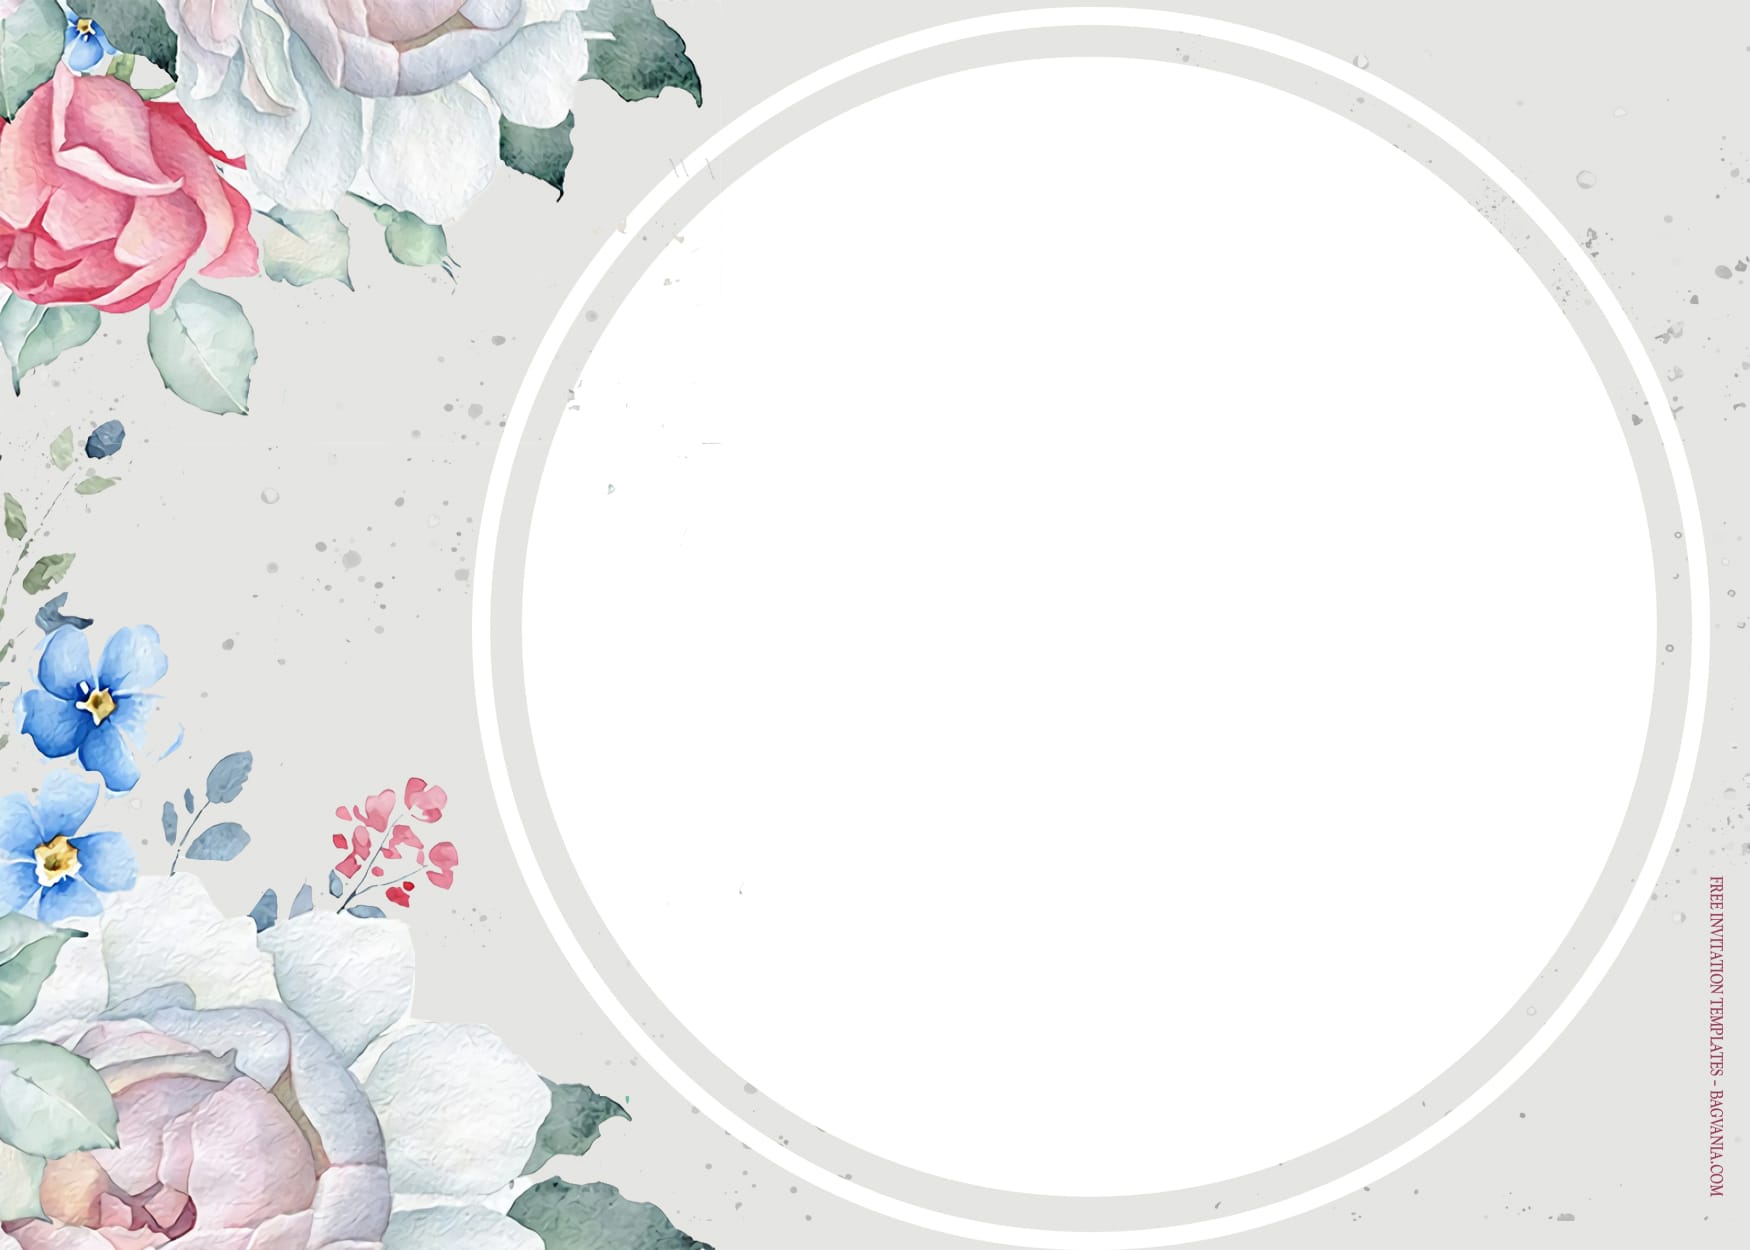 9+ Delicate Winter Watercolor Floral Wedding Invitation Templates Type One